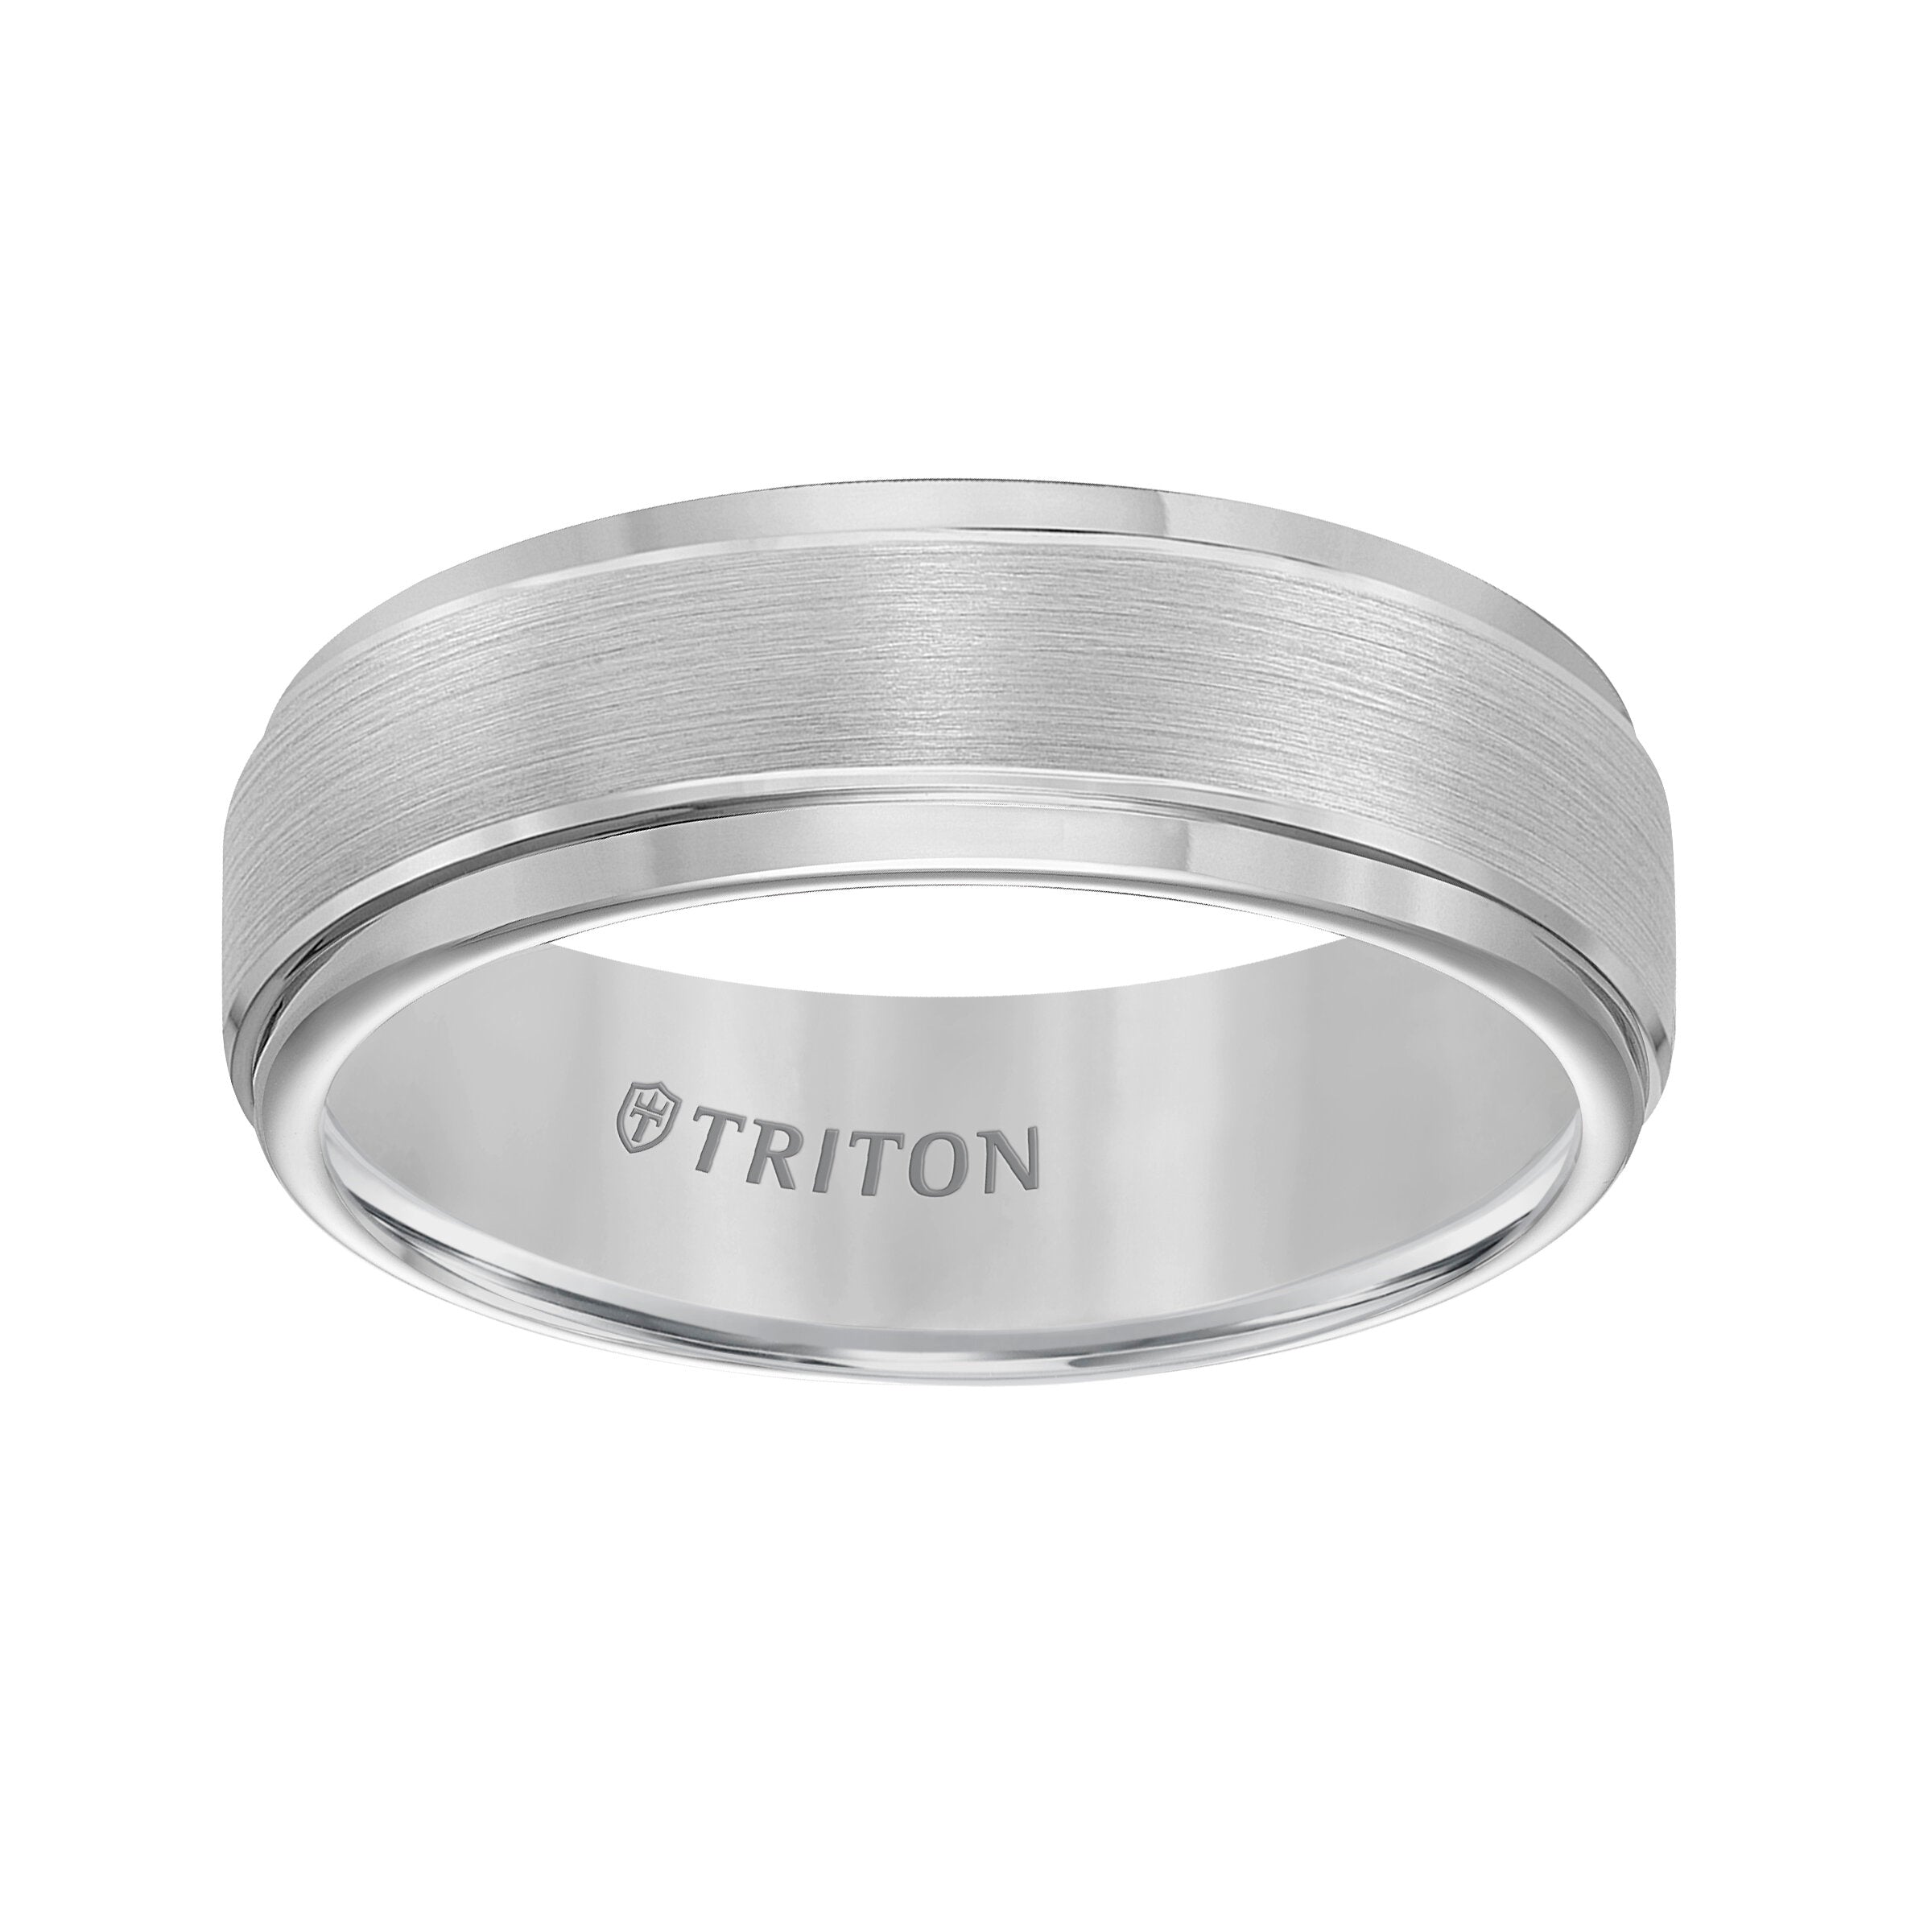 7MM Grey Tungsten Carbide Ring - Brushed Finish and Step Edge